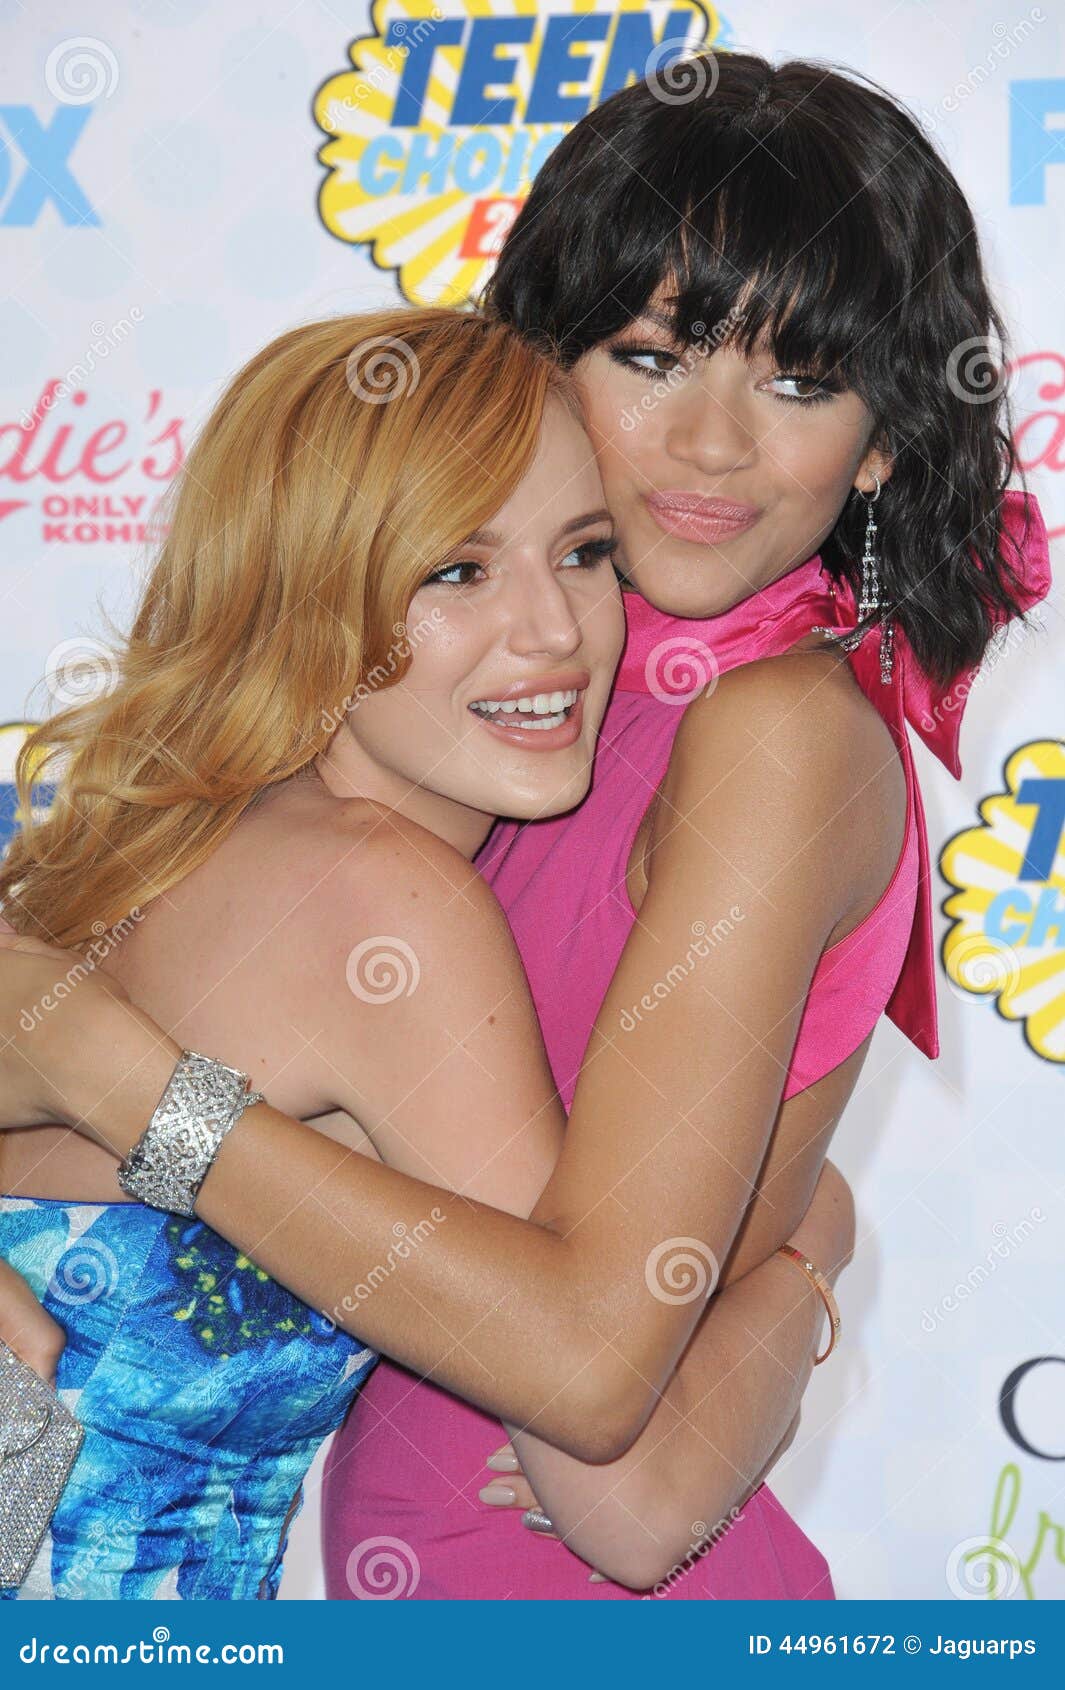 Happened zendaya bella and to thorne what The Spine